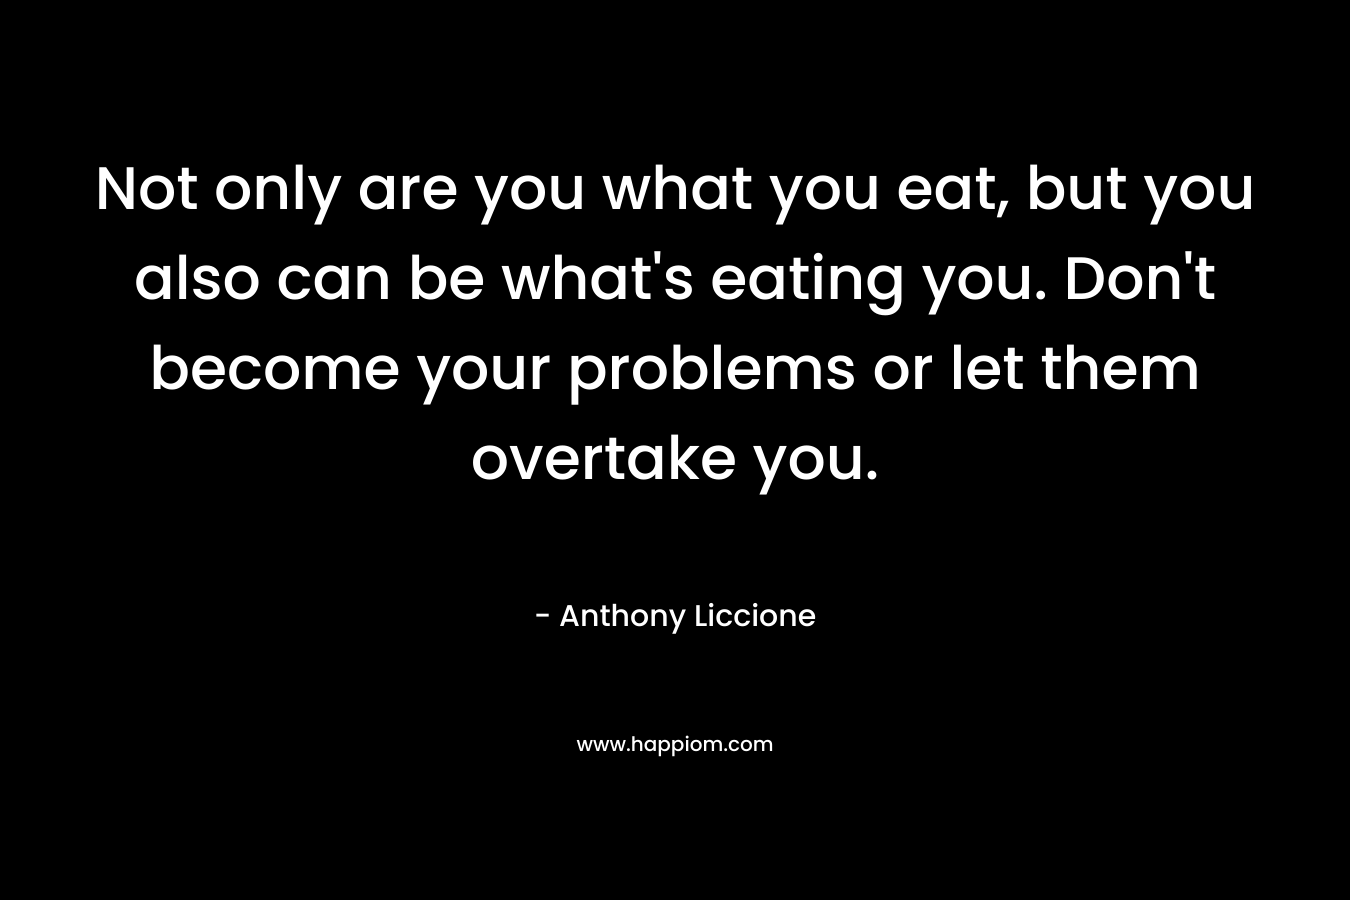 Not only are you what you eat, but you also can be what’s eating you. Don’t become your problems or let them overtake you. – Anthony Liccione